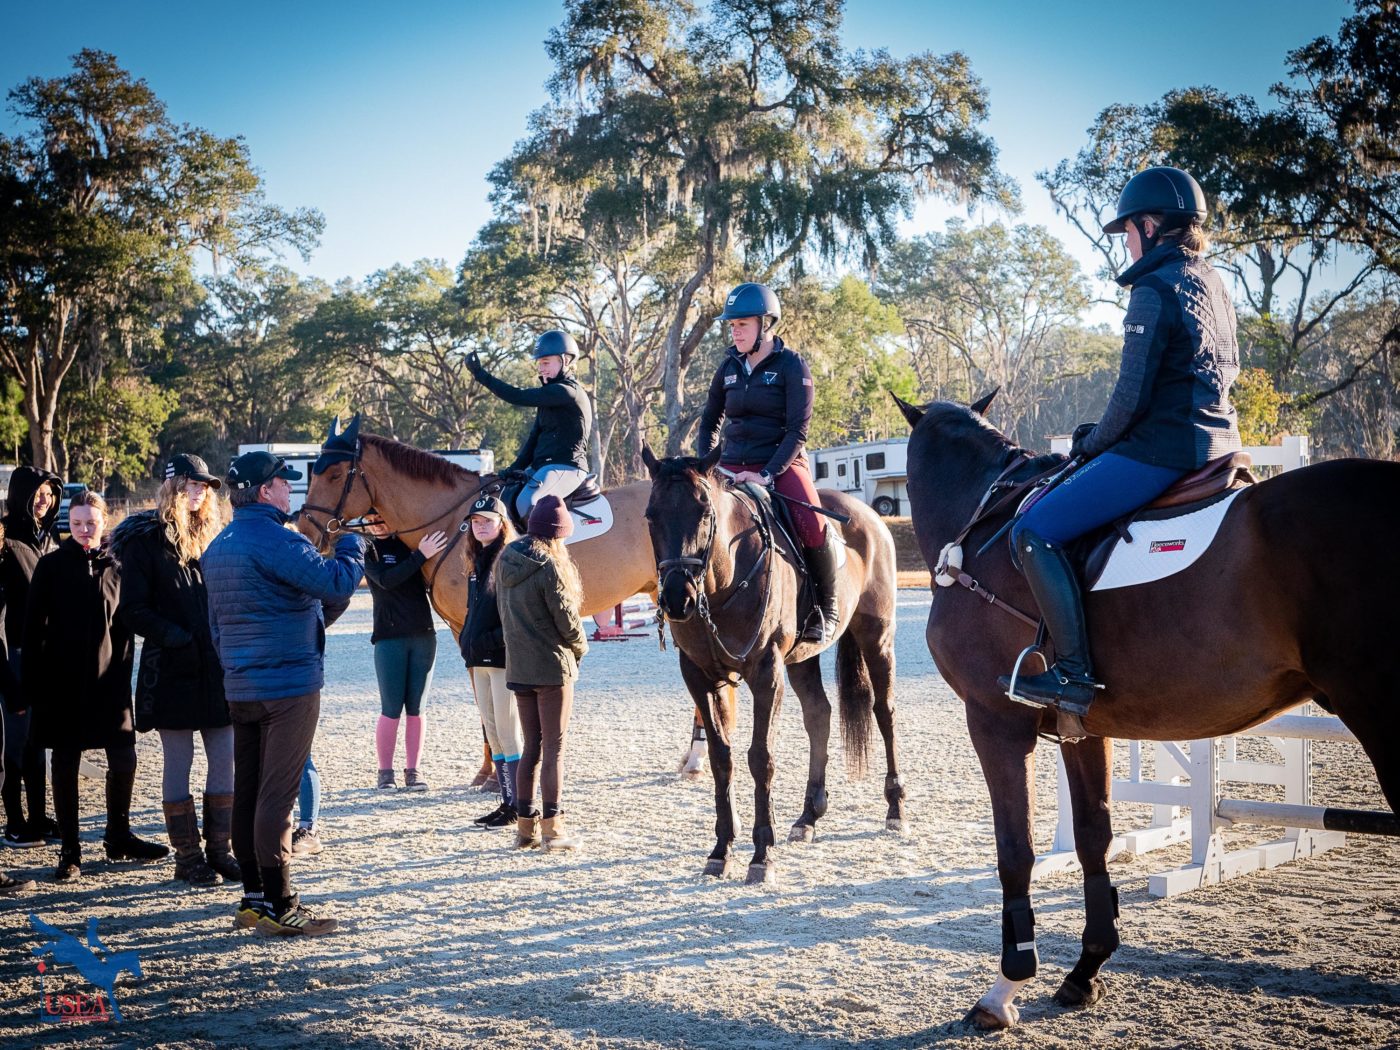 O'Connor instructing Audrey Sanborn, Kayla Dumler and Madelyn Floyd, all on catch-ride horses. USEA/Lily Stidham photo.